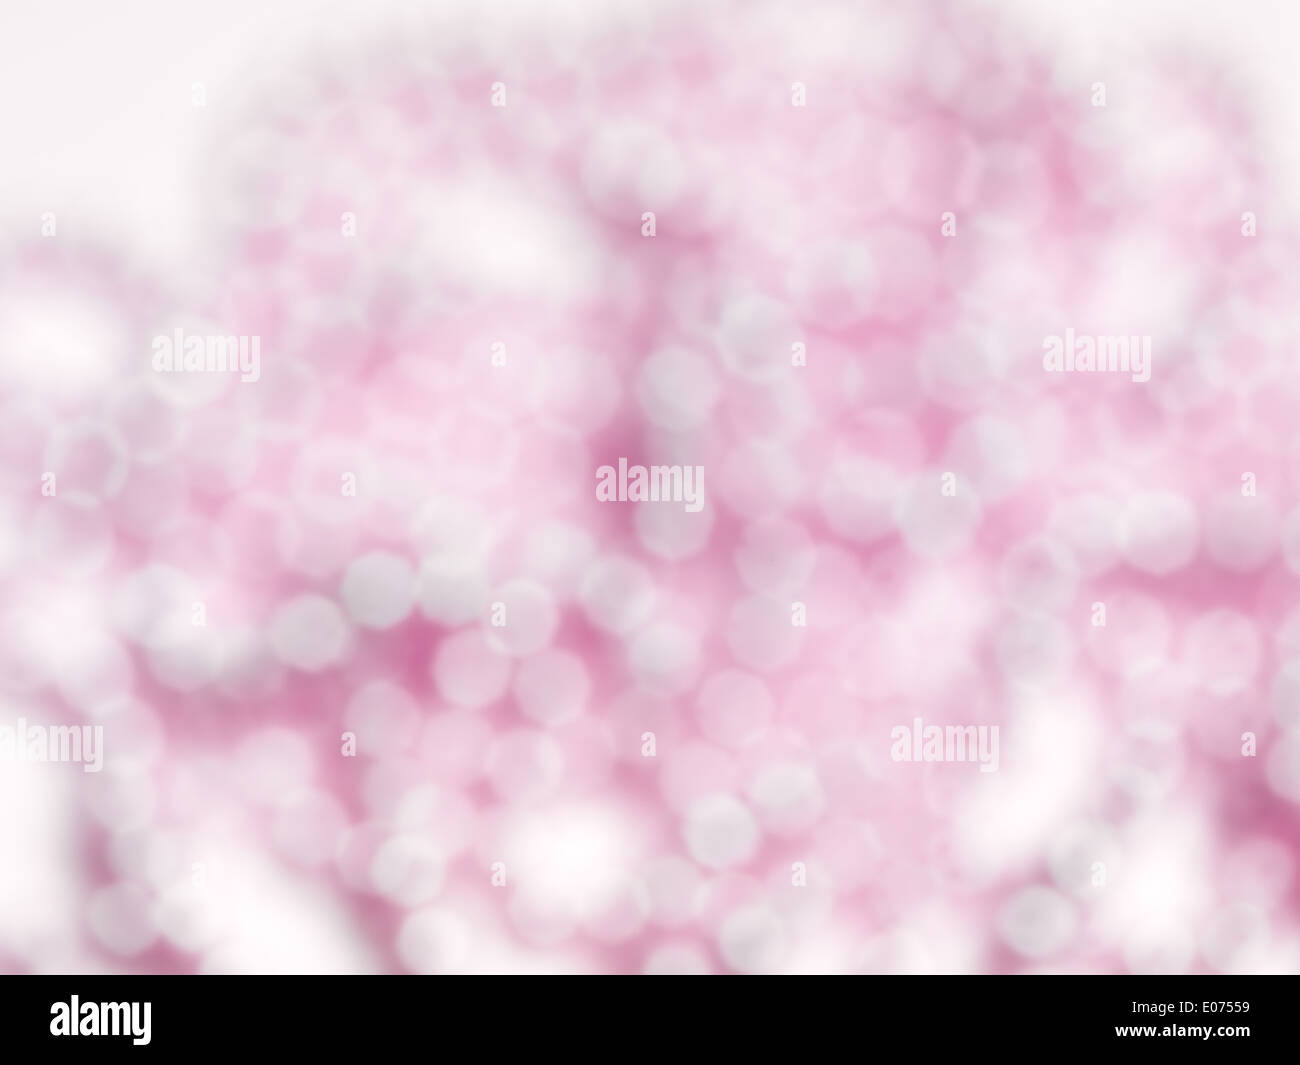 Abstract pink shiny blurry out-of-focus background texture Stock Photo